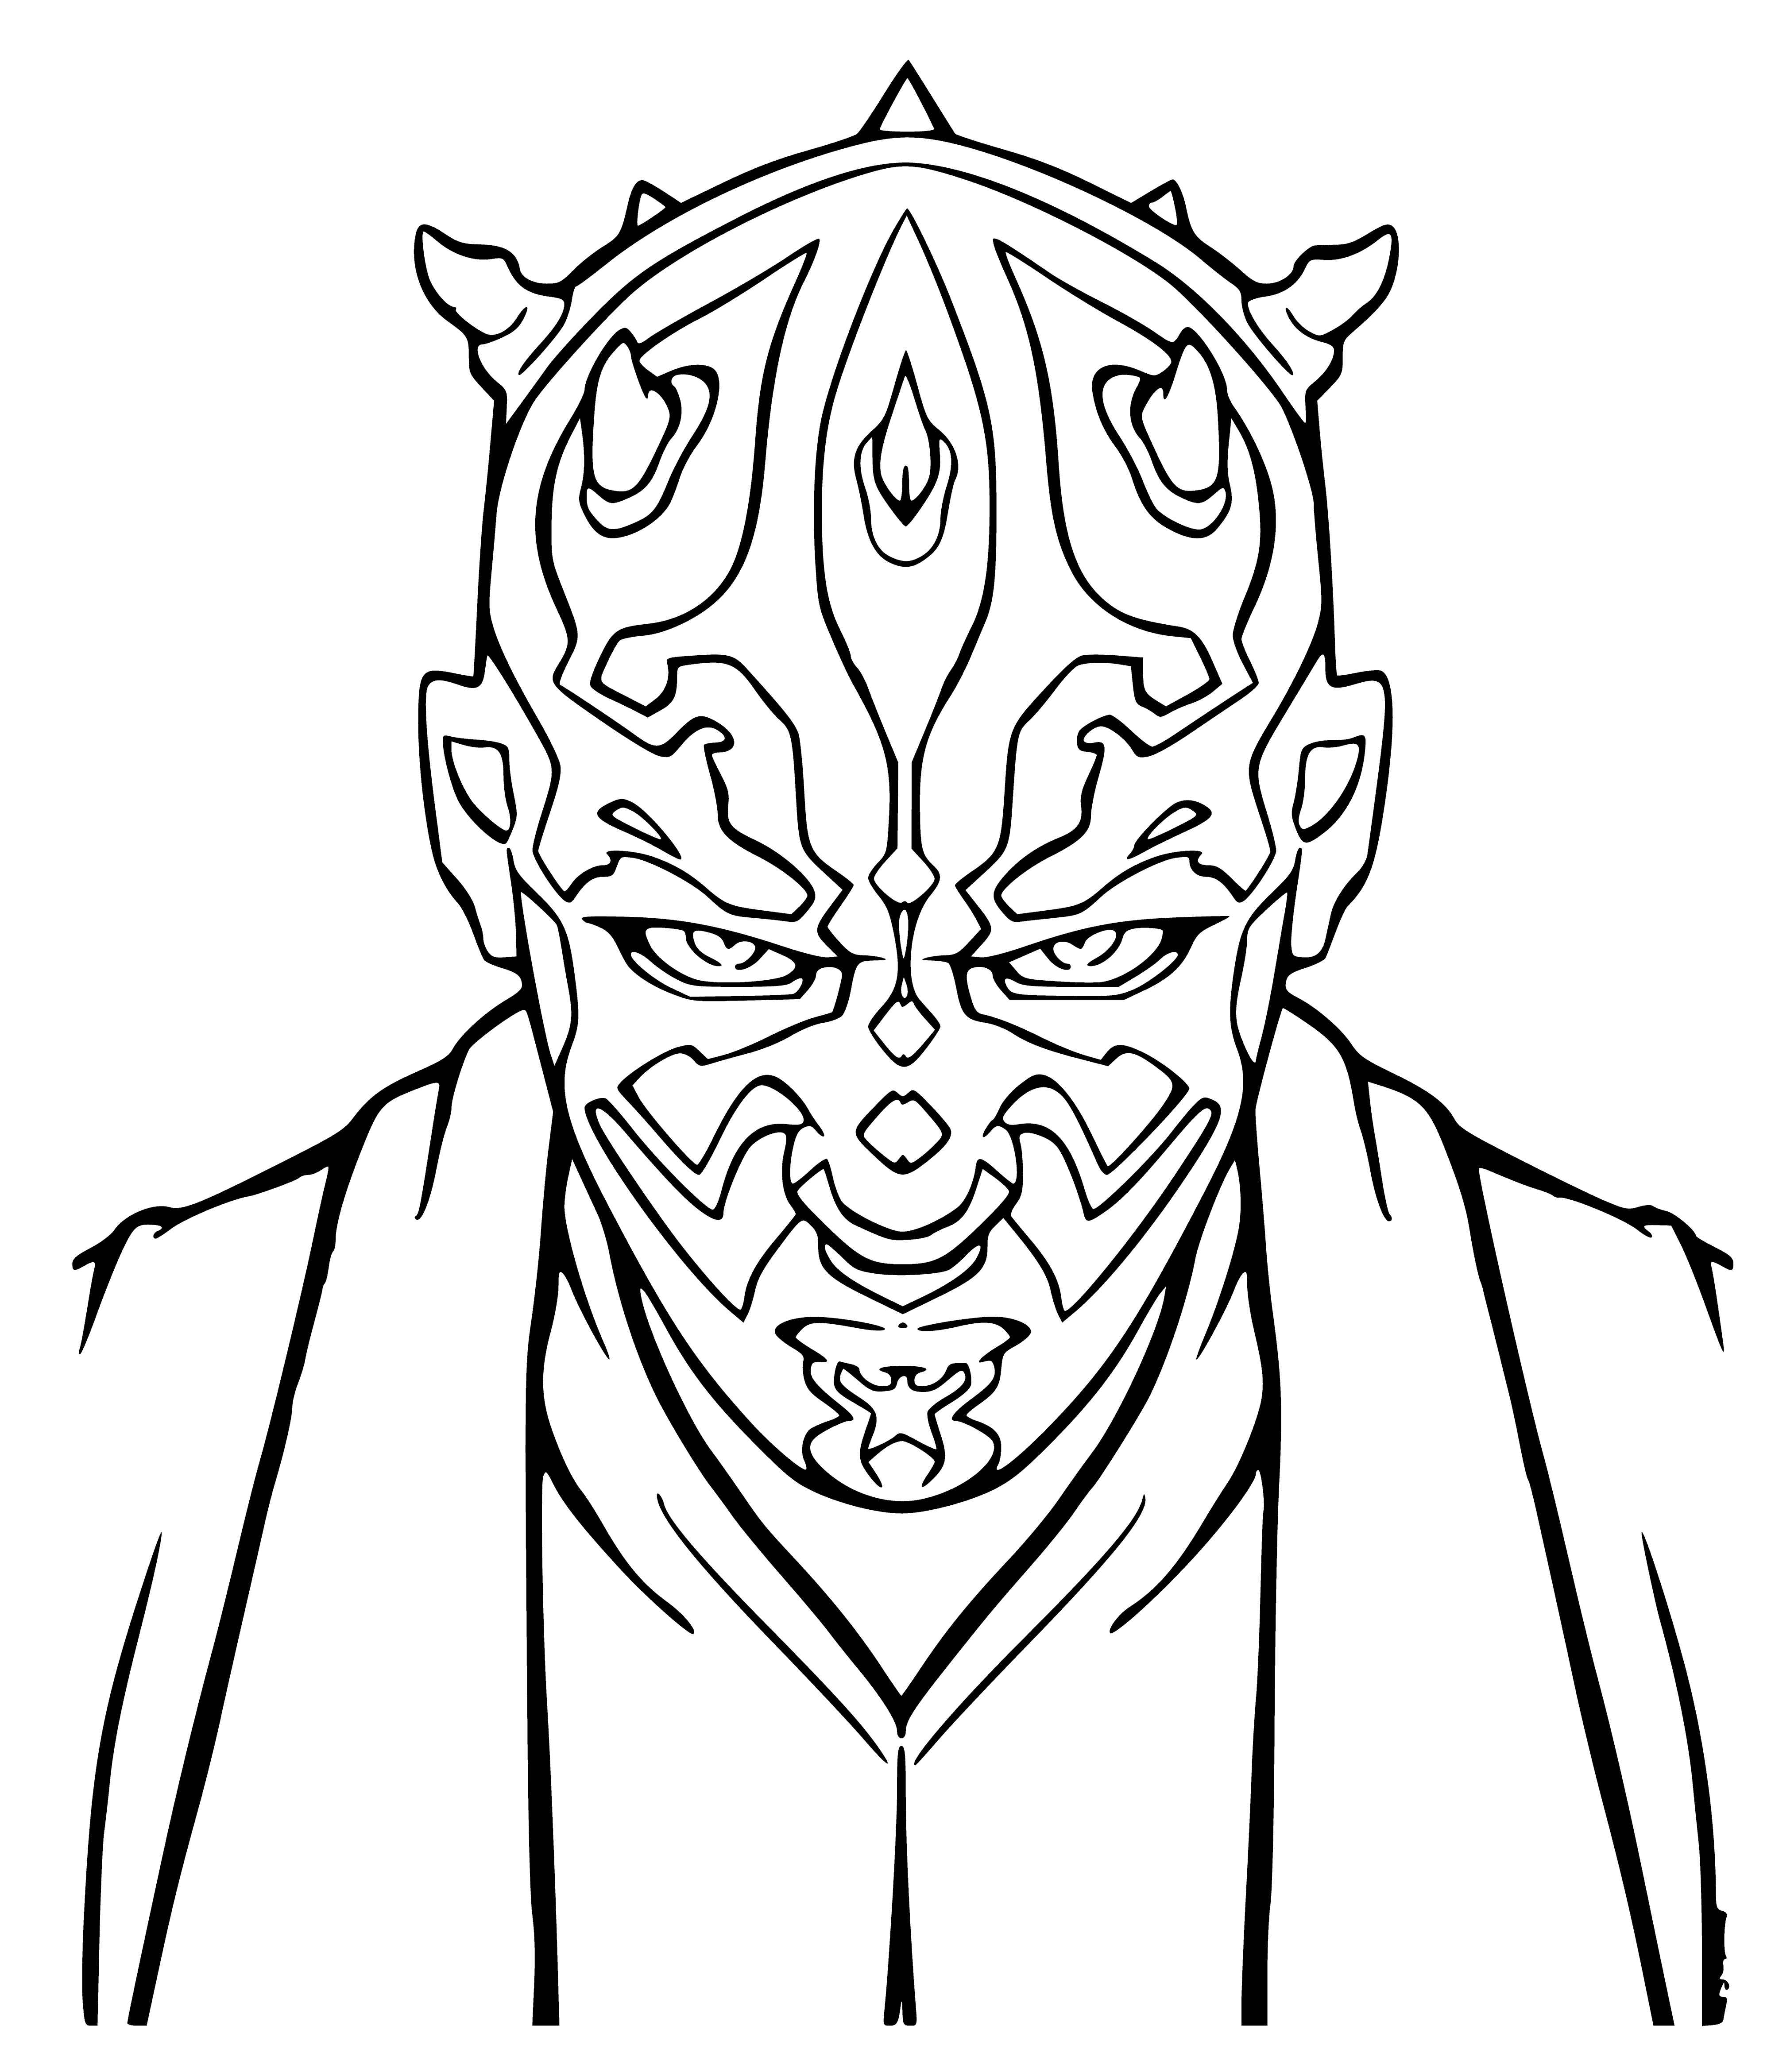 Sith, Disciple of Sidious coloring page